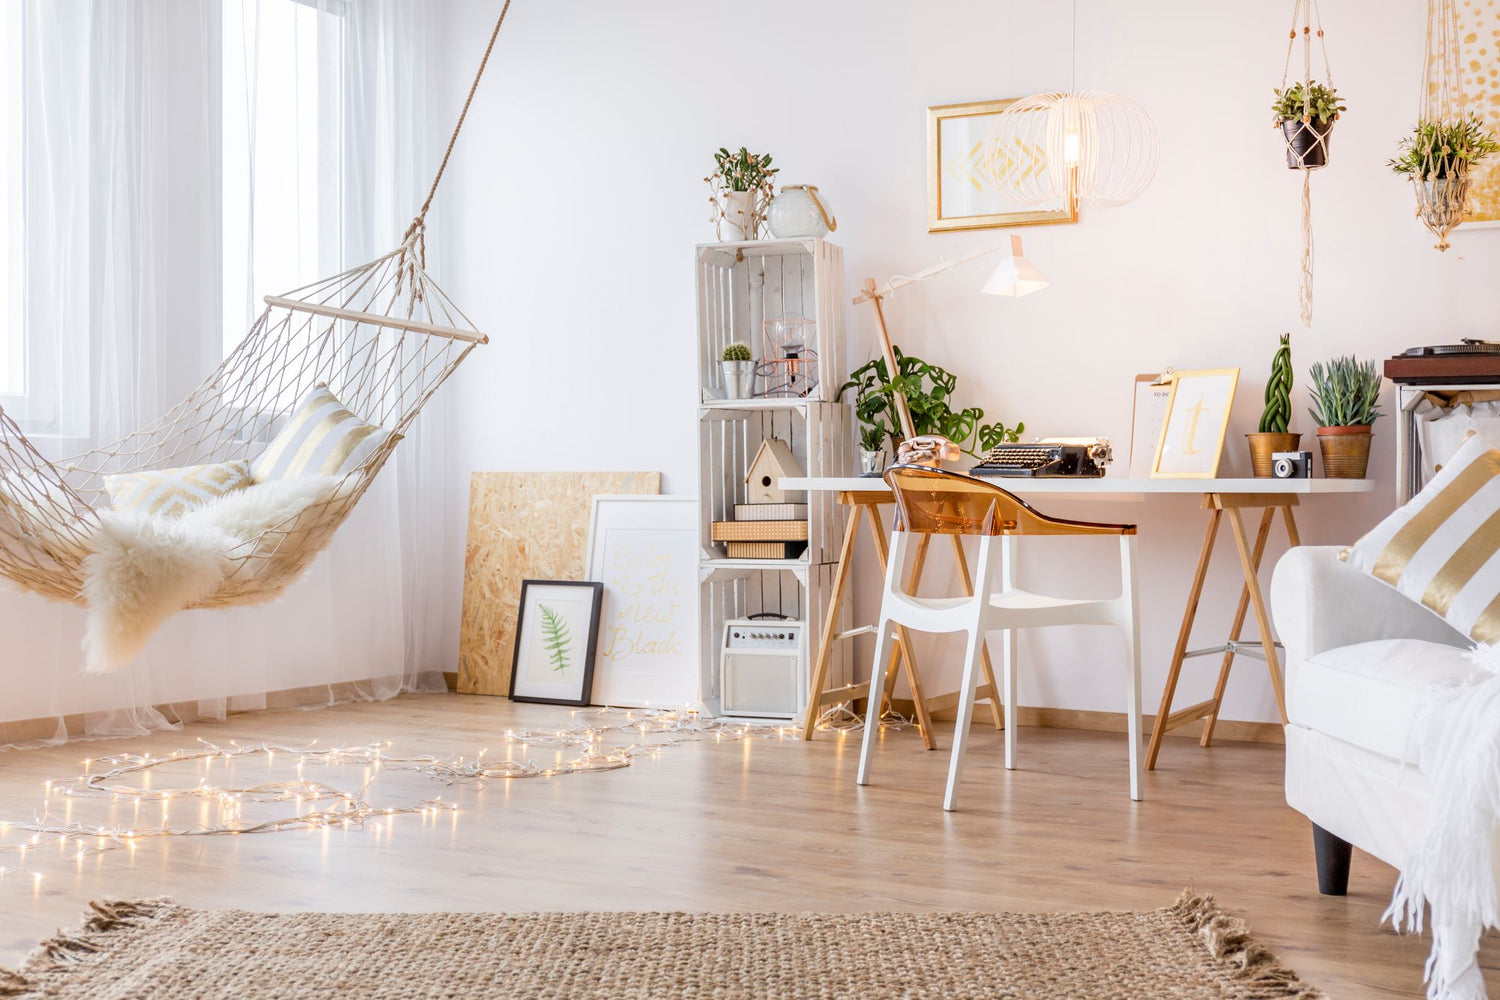 A hygge-inspired home decor